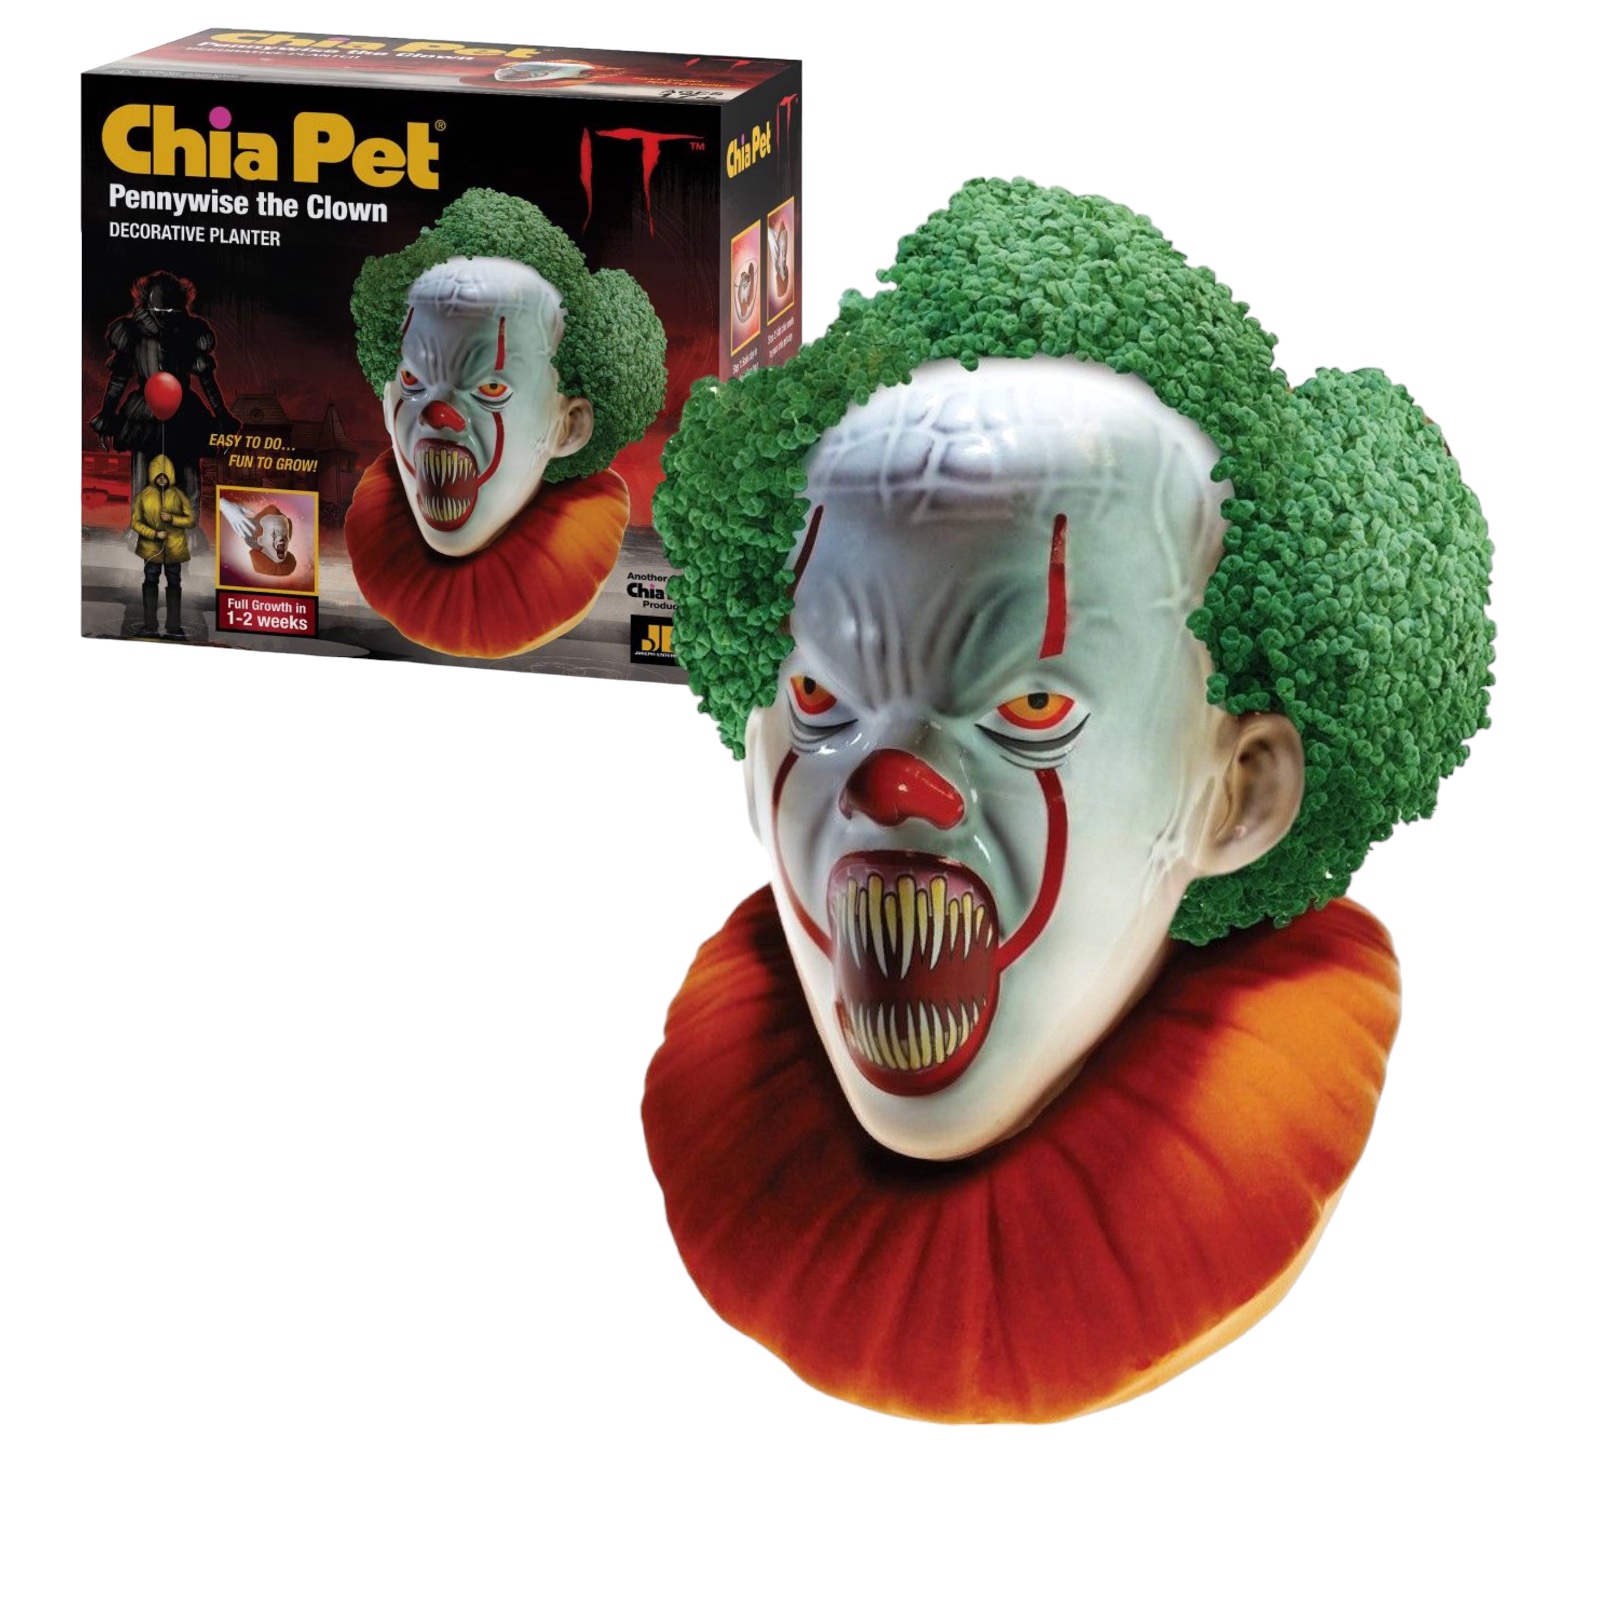 Chia Pet Planter - It- Pennywise the Clown - Scream